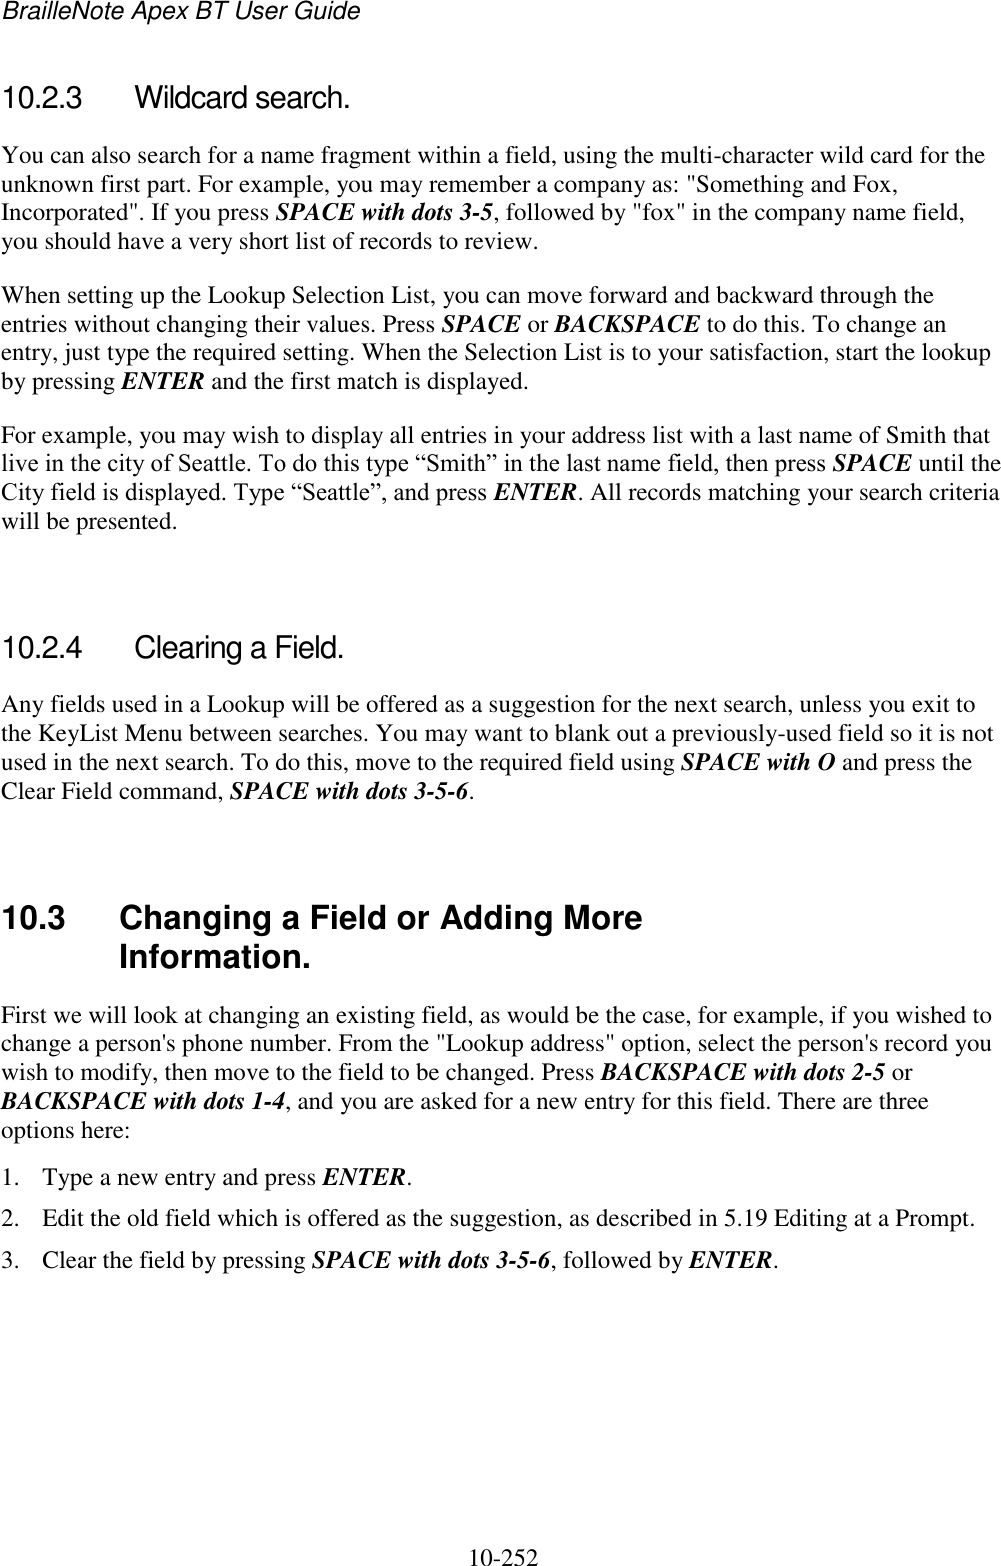 BrailleNote Apex BT User Guide   10-252   10.2.3  Wildcard search. You can also search for a name fragment within a field, using the multi-character wild card for the unknown first part. For example, you may remember a company as: &quot;Something and Fox, Incorporated&quot;. If you press SPACE with dots 3-5, followed by &quot;fox&quot; in the company name field, you should have a very short list of records to review. When setting up the Lookup Selection List, you can move forward and backward through the entries without changing their values. Press SPACE or BACKSPACE to do this. To change an entry, just type the required setting. When the Selection List is to your satisfaction, start the lookup by pressing ENTER and the first match is displayed. For example, you may wish to display all entries in your address list with a last name of Smith that live in the city of Seattle. To do this type “Smith” in the last name field, then press SPACE until the City field is displayed. Type “Seattle”, and press ENTER. All records matching your search criteria will be presented.   10.2.4  Clearing a Field. Any fields used in a Lookup will be offered as a suggestion for the next search, unless you exit to the KeyList Menu between searches. You may want to blank out a previously-used field so it is not used in the next search. To do this, move to the required field using SPACE with O and press the Clear Field command, SPACE with dots 3-5-6.   10.3  Changing a Field or Adding More Information. First we will look at changing an existing field, as would be the case, for example, if you wished to change a person&apos;s phone number. From the &quot;Lookup address&quot; option, select the person&apos;s record you wish to modify, then move to the field to be changed. Press BACKSPACE with dots 2-5 or BACKSPACE with dots 1-4, and you are asked for a new entry for this field. There are three options here: 1. Type a new entry and press ENTER. 2. Edit the old field which is offered as the suggestion, as described in 5.19 Editing at a Prompt. 3. Clear the field by pressing SPACE with dots 3-5-6, followed by ENTER. 